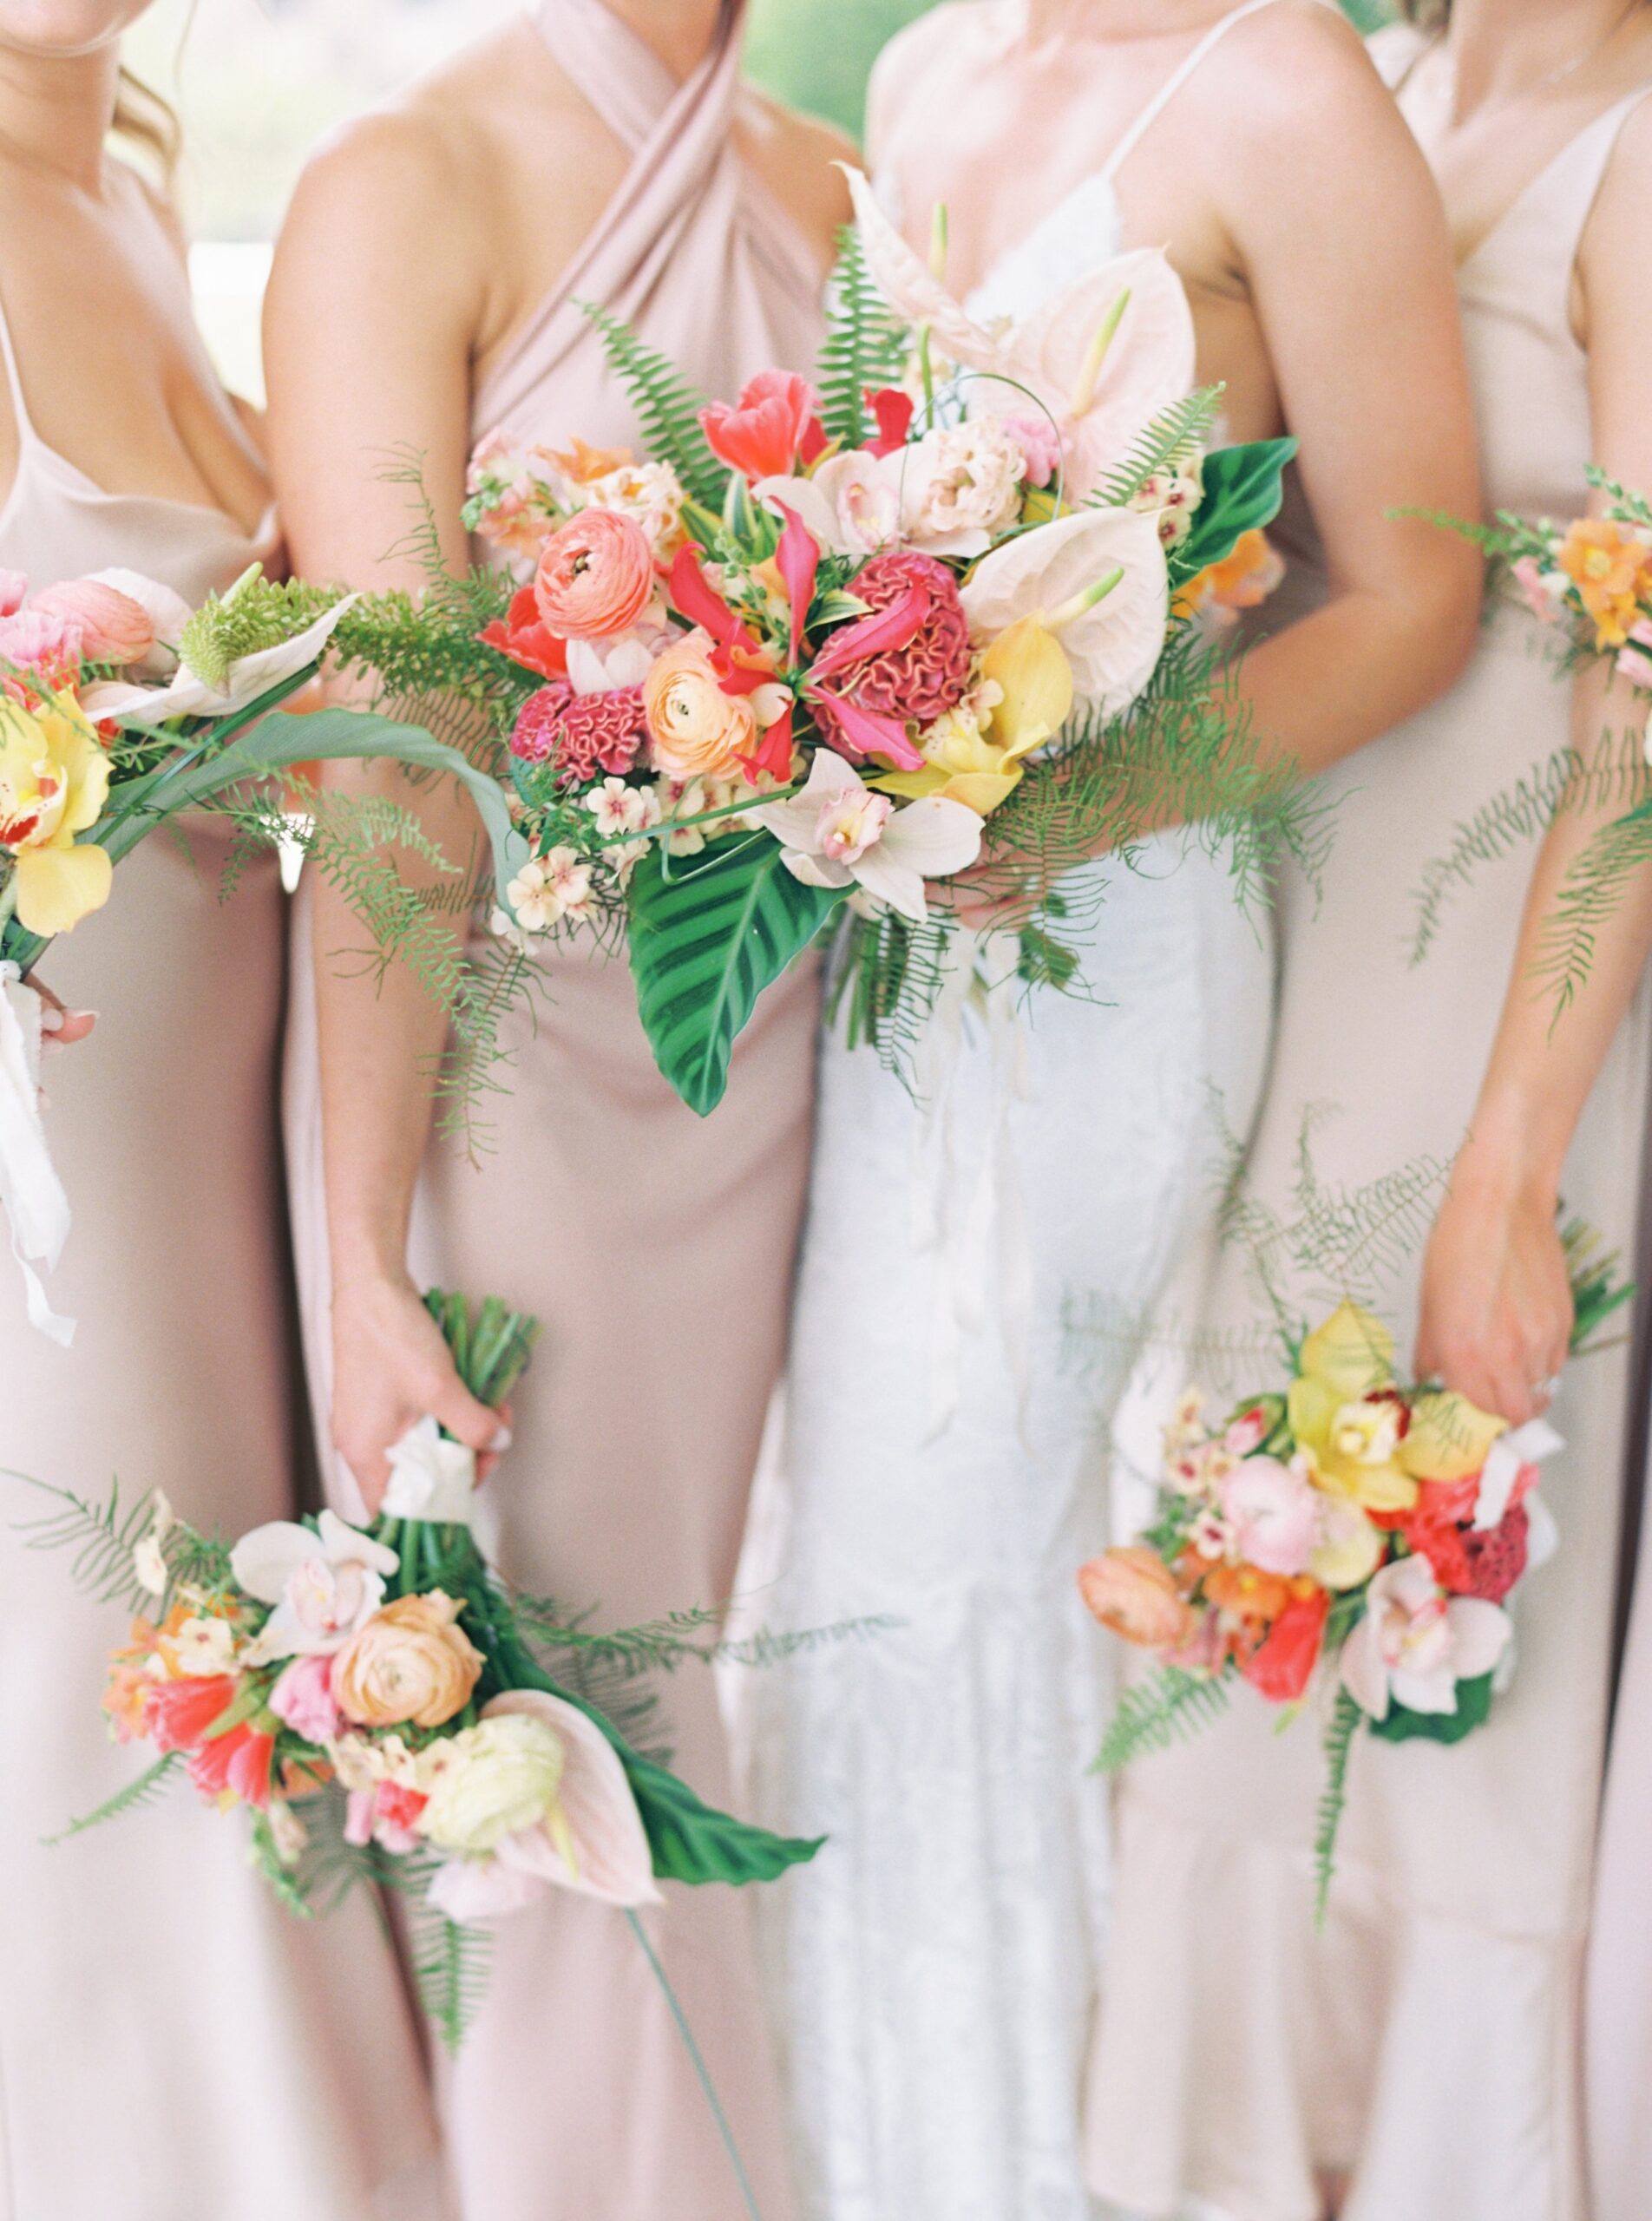 Bride and bridesmaids bright and tropical bouquet.